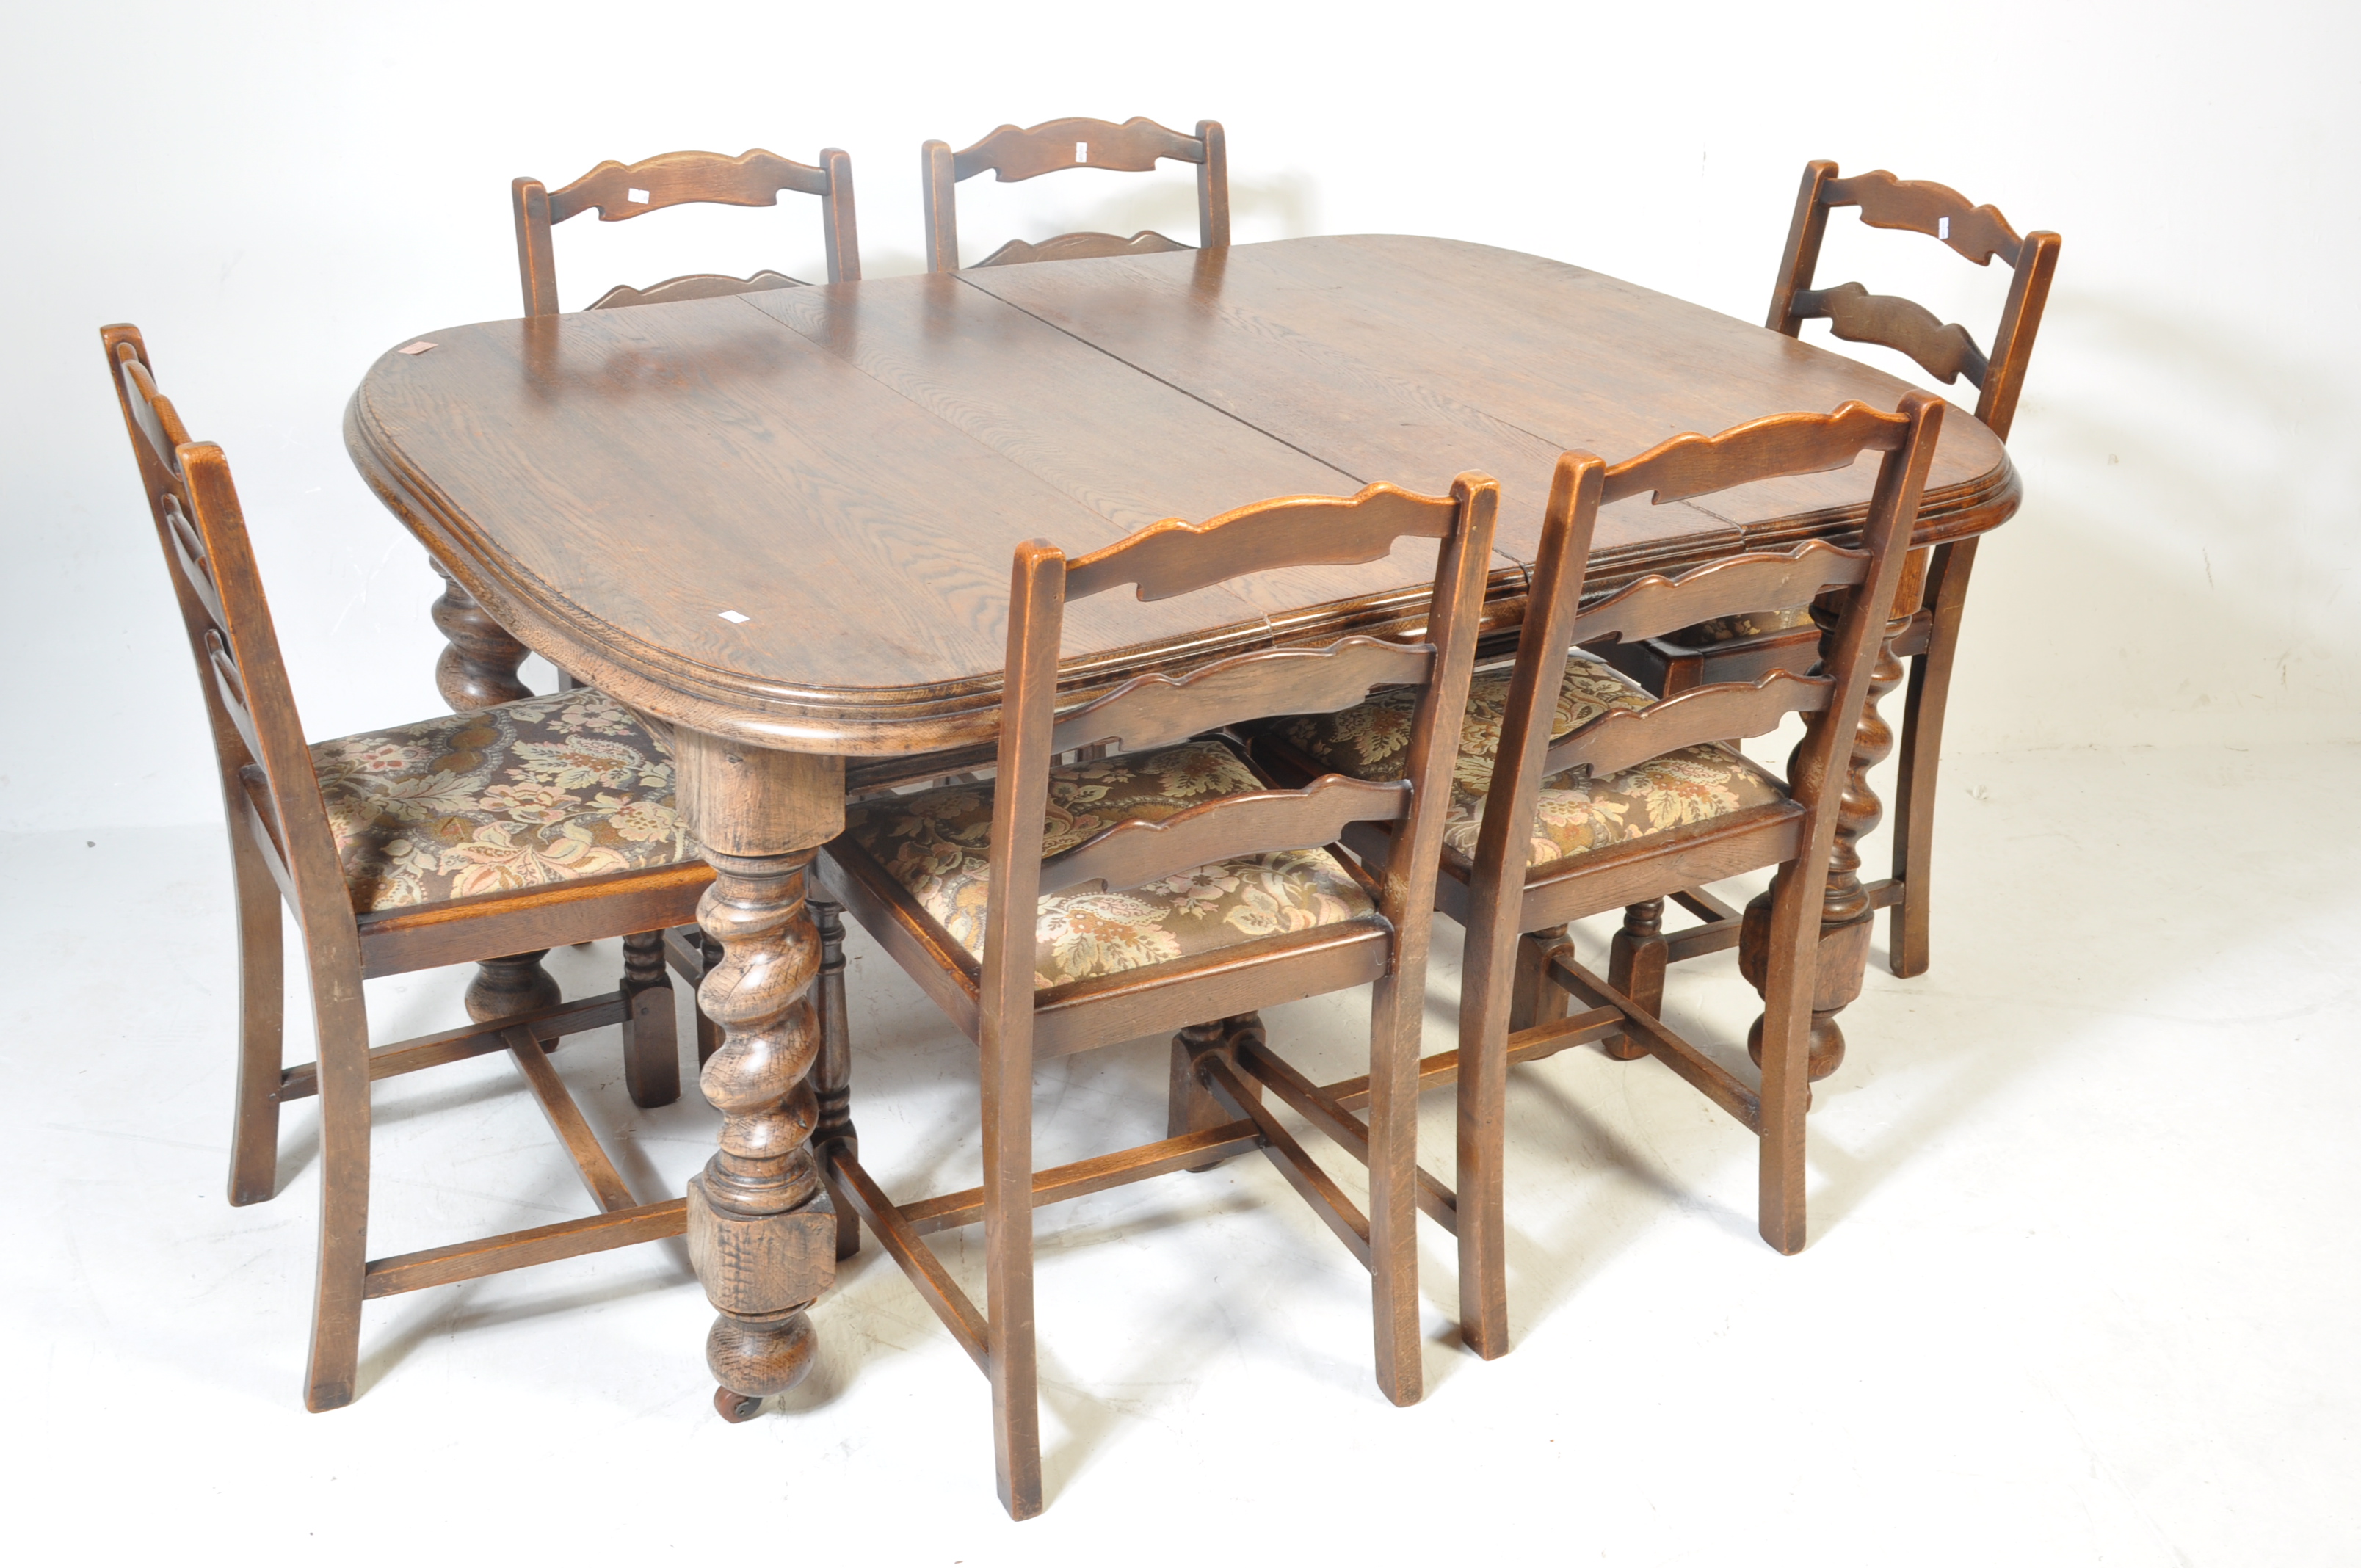 EDWARDIAN OAK BARLEY TWIST EXTENDING DINING TABLE & CHAIRS - Image 2 of 7